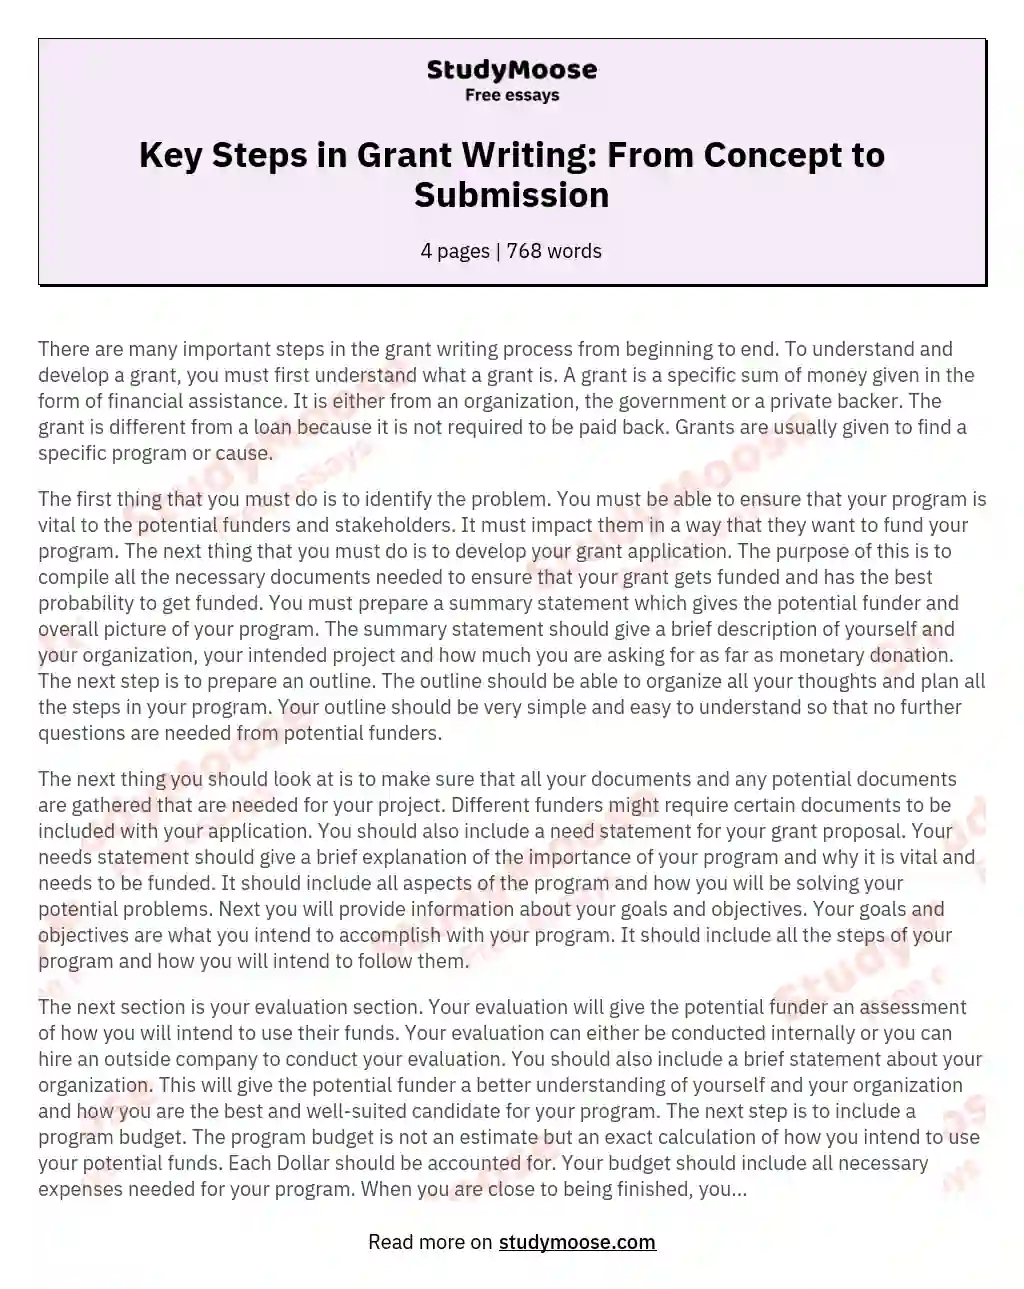 Key Steps in Grant Writing: From Concept to Submission essay